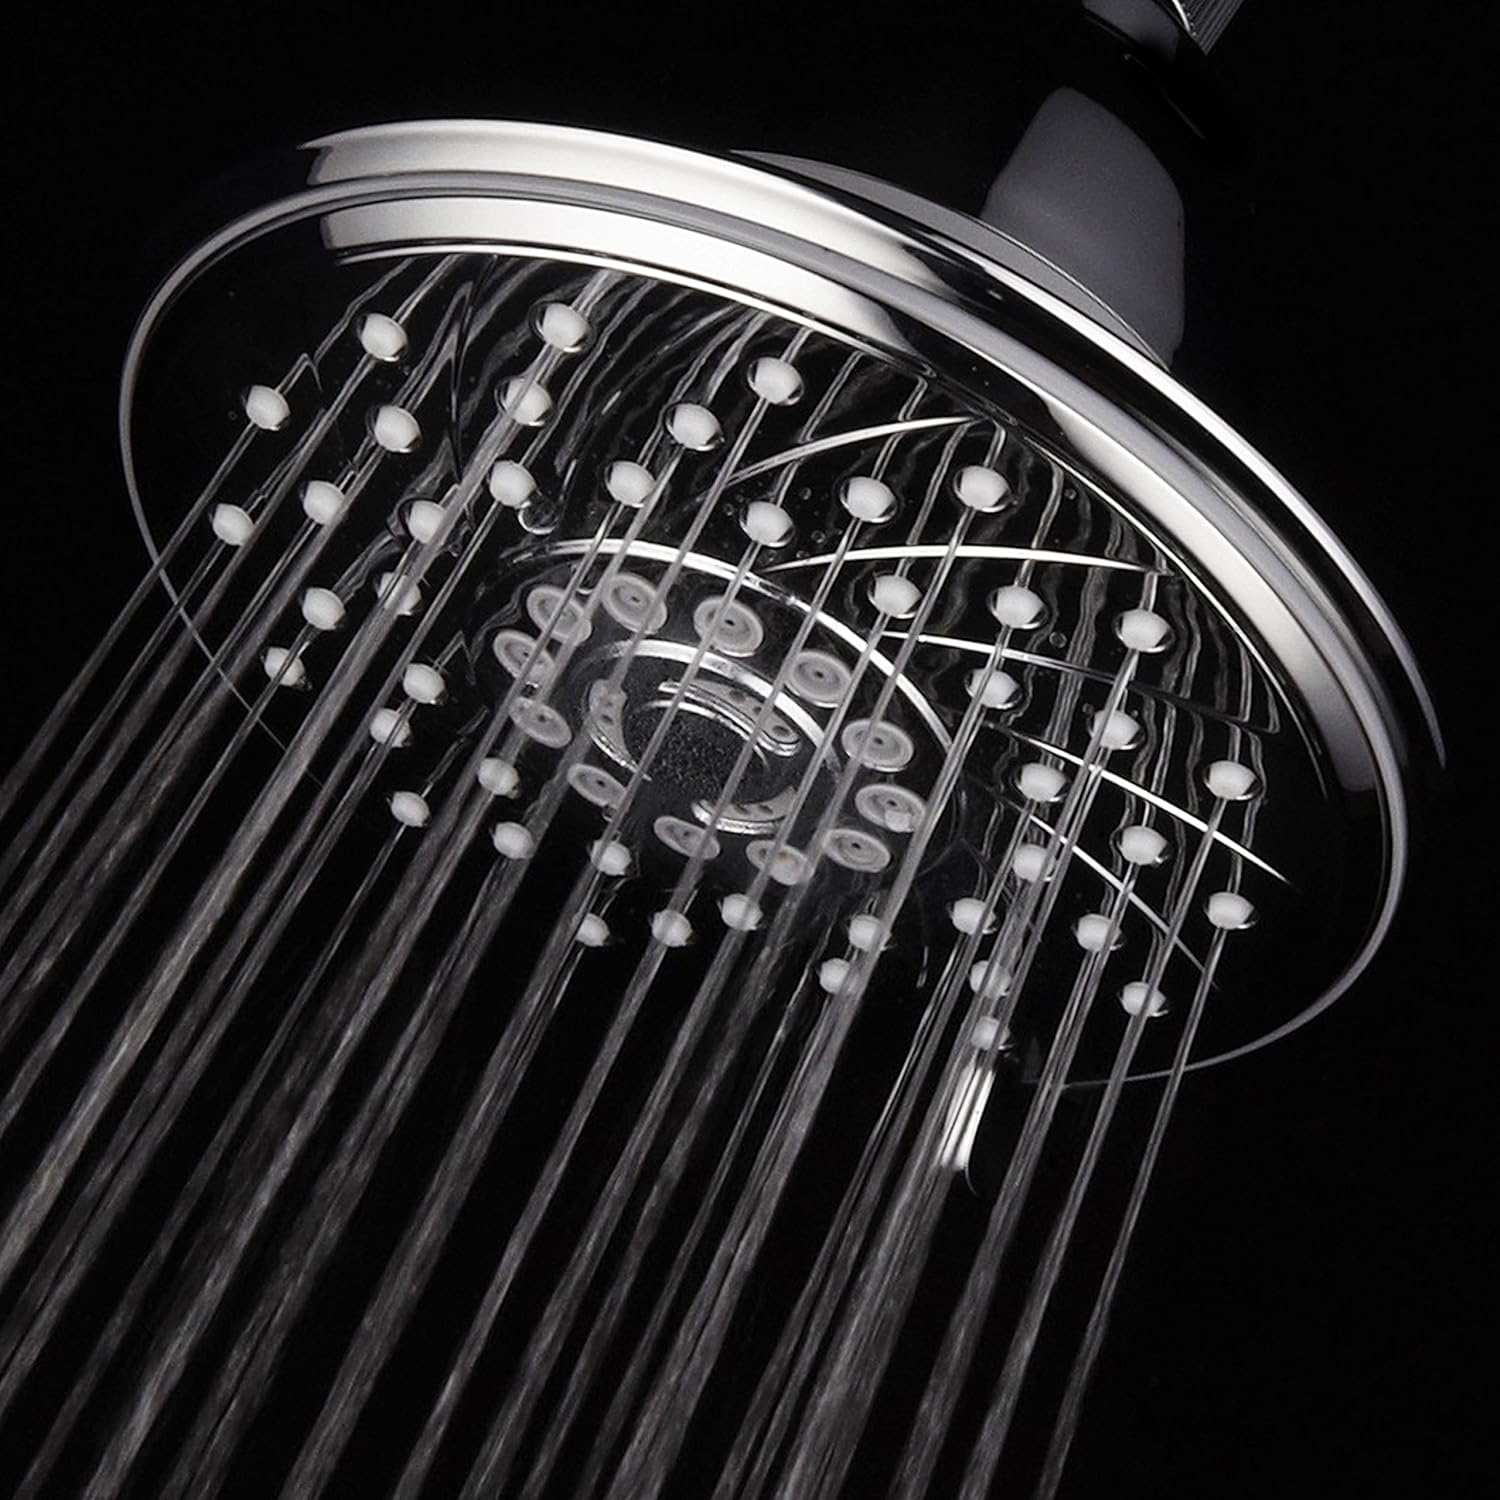 HOTEL SPA - Shower Head High Pressure with Shower Filter - 6 Inch Rain Shower Head - 3-Stage, Showerhead Filter for Hard Water, 6-Setting, Ultra-Luxury, Showerspa (Chrome)